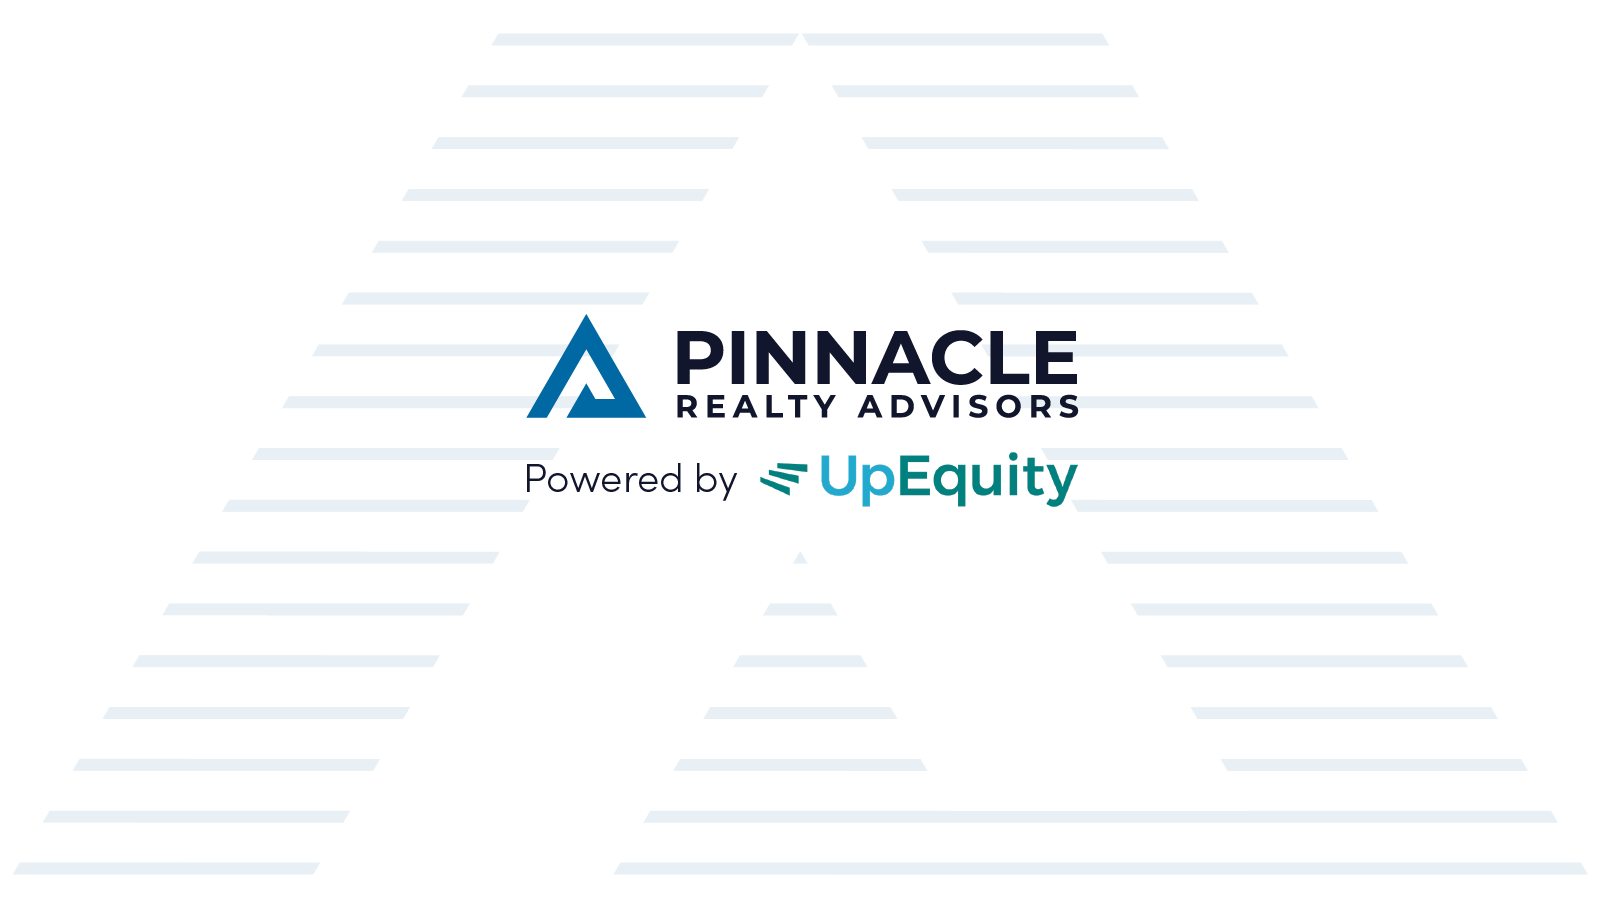 UpEquity and Pinnacle Realty Advisors Partner to Transform Real Estate Buying & Selling